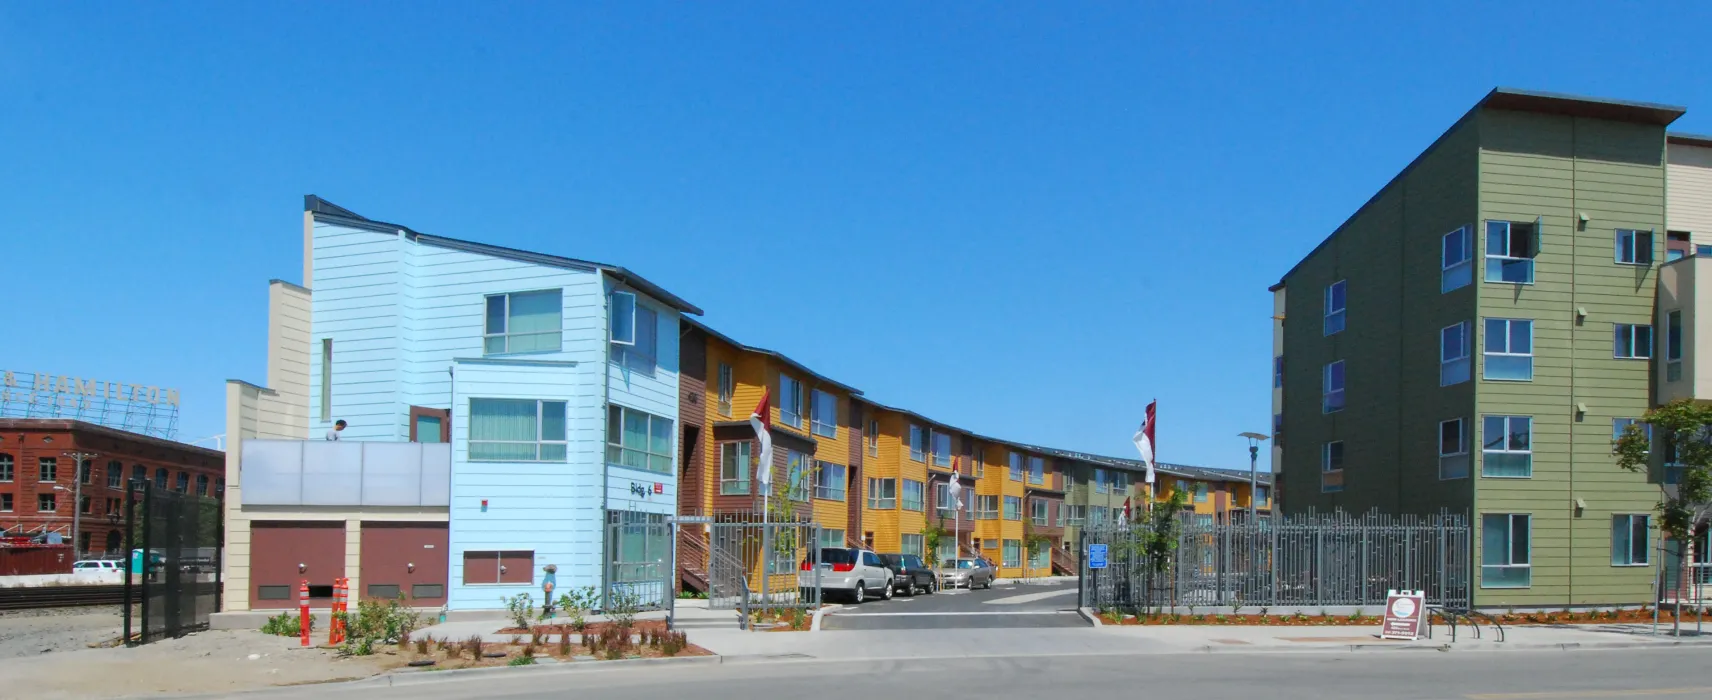 Exterior view of Crescent Cove in San Francisco.